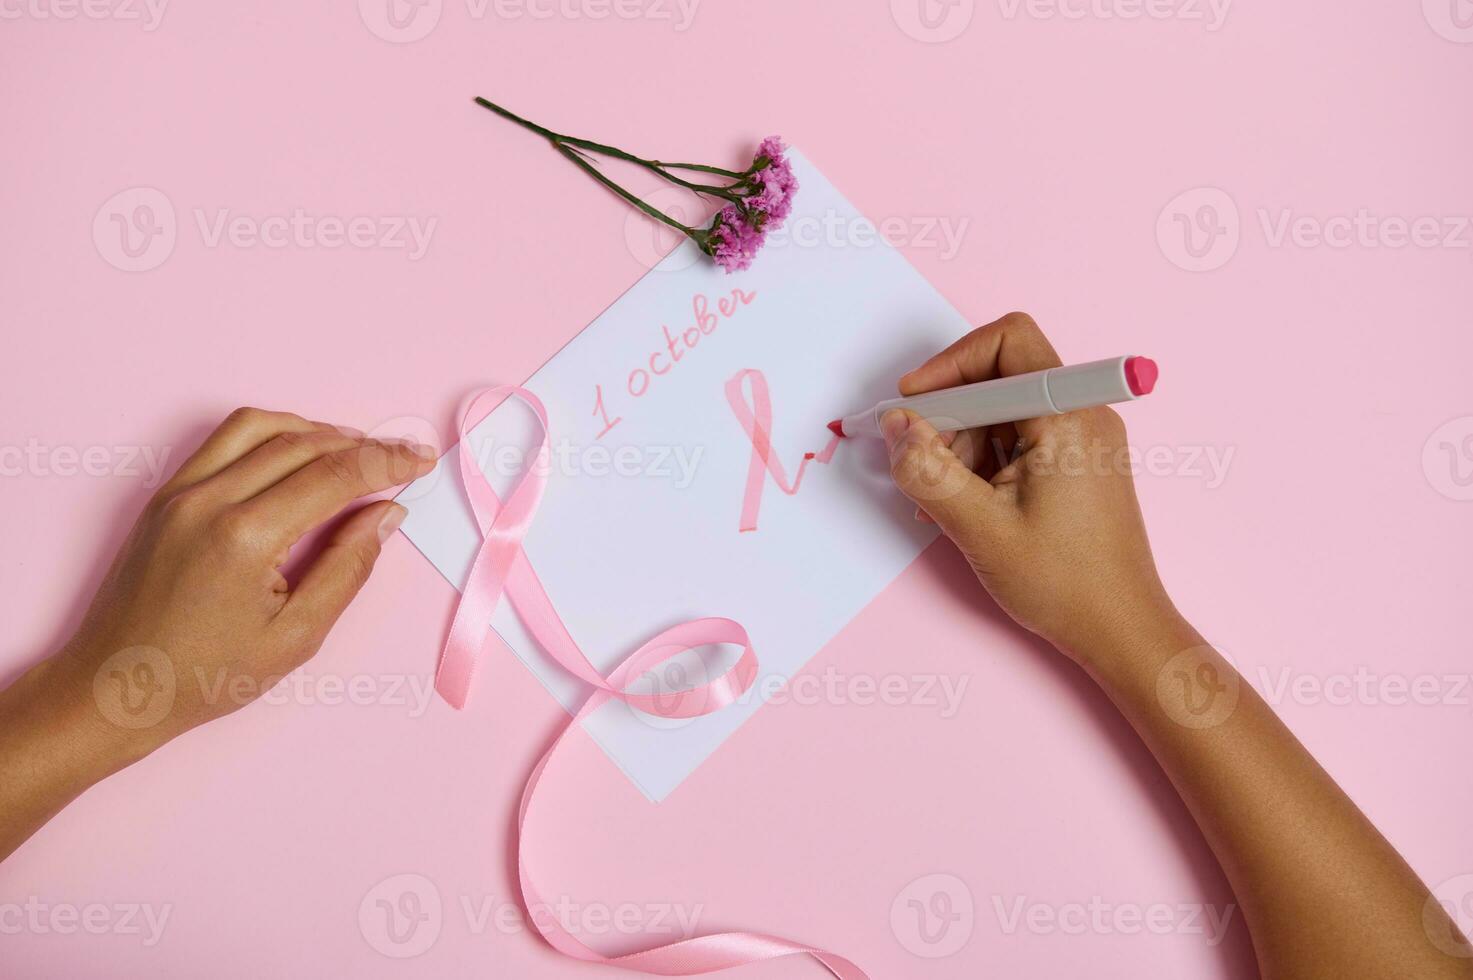 Flat lay of a woman's hand holding a felt-tip pen writes october 1 and draws on the paper a pink symbol of breast cancer awareness month, a pink ribbon with an endless end, lying on a pink background photo